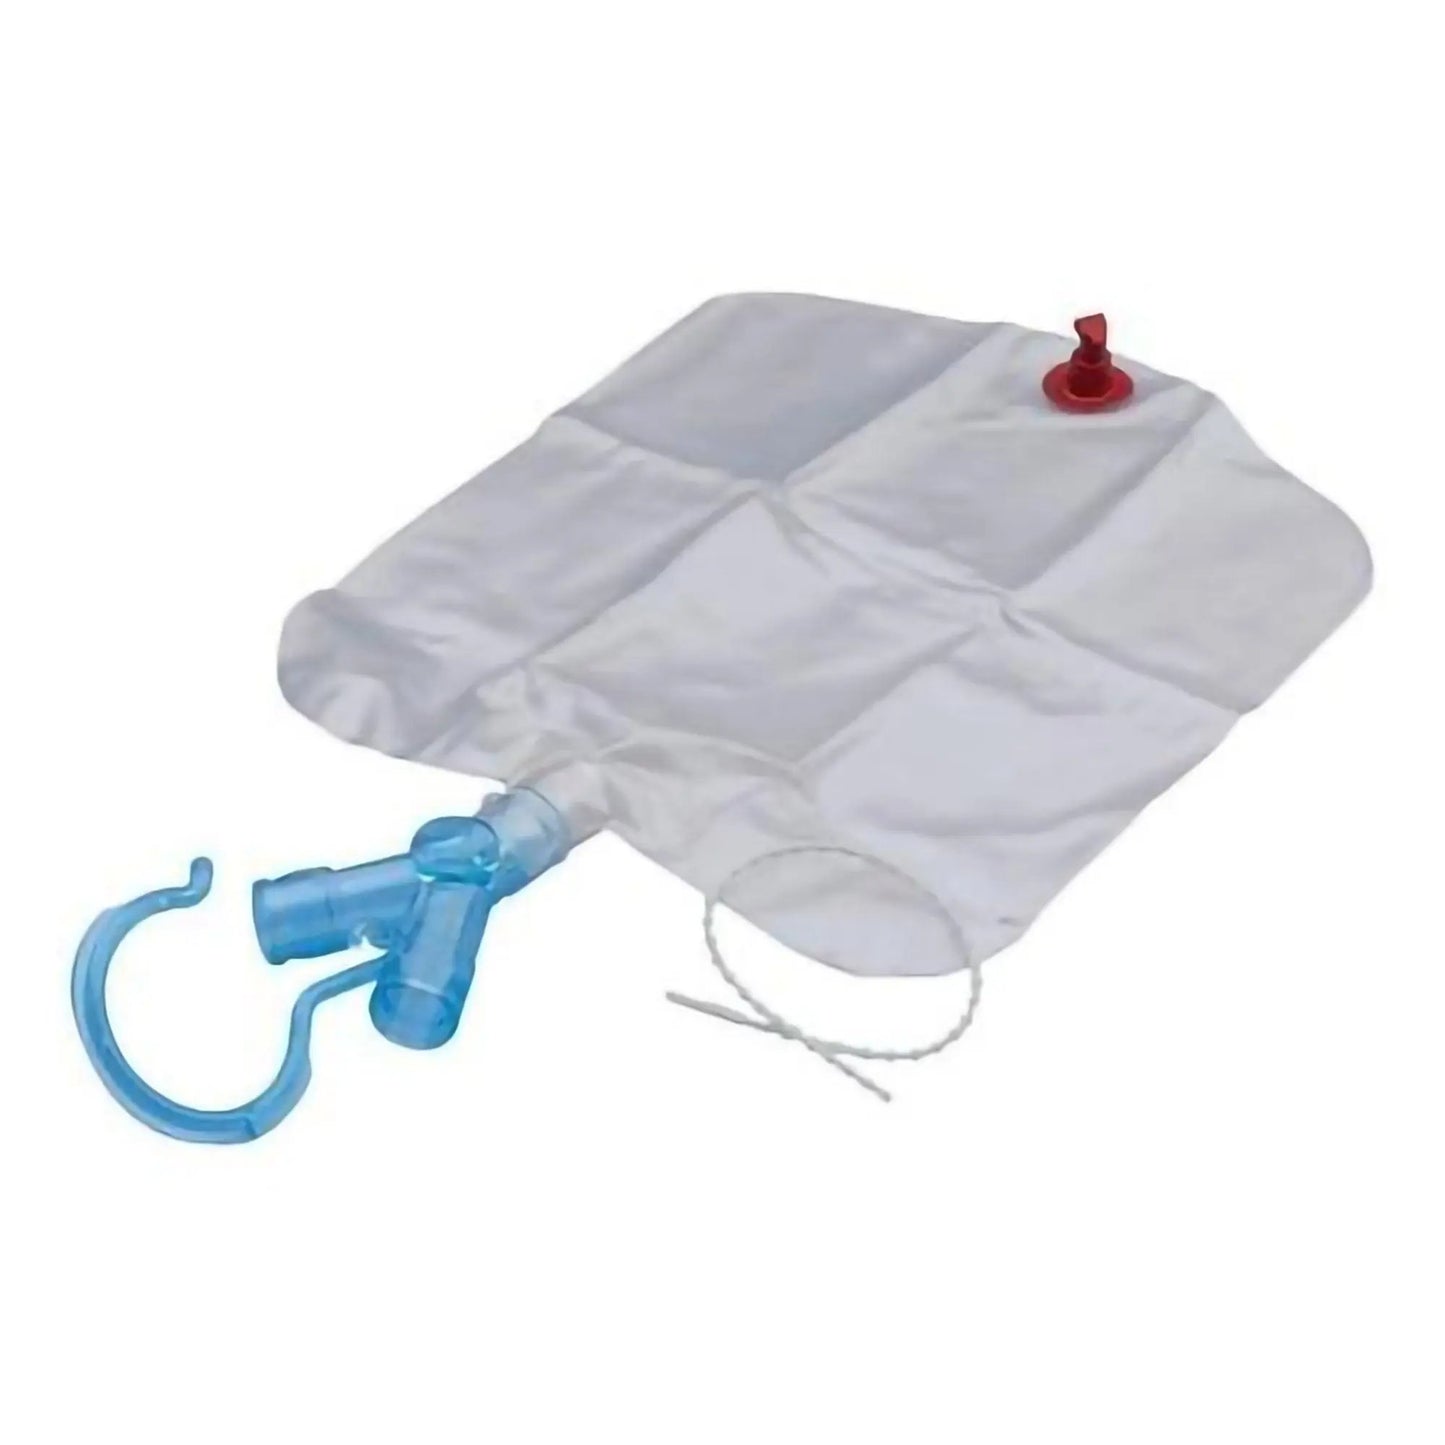 Vyaire Medical AirLife Aerosol Drainage Bag With Safety Valve